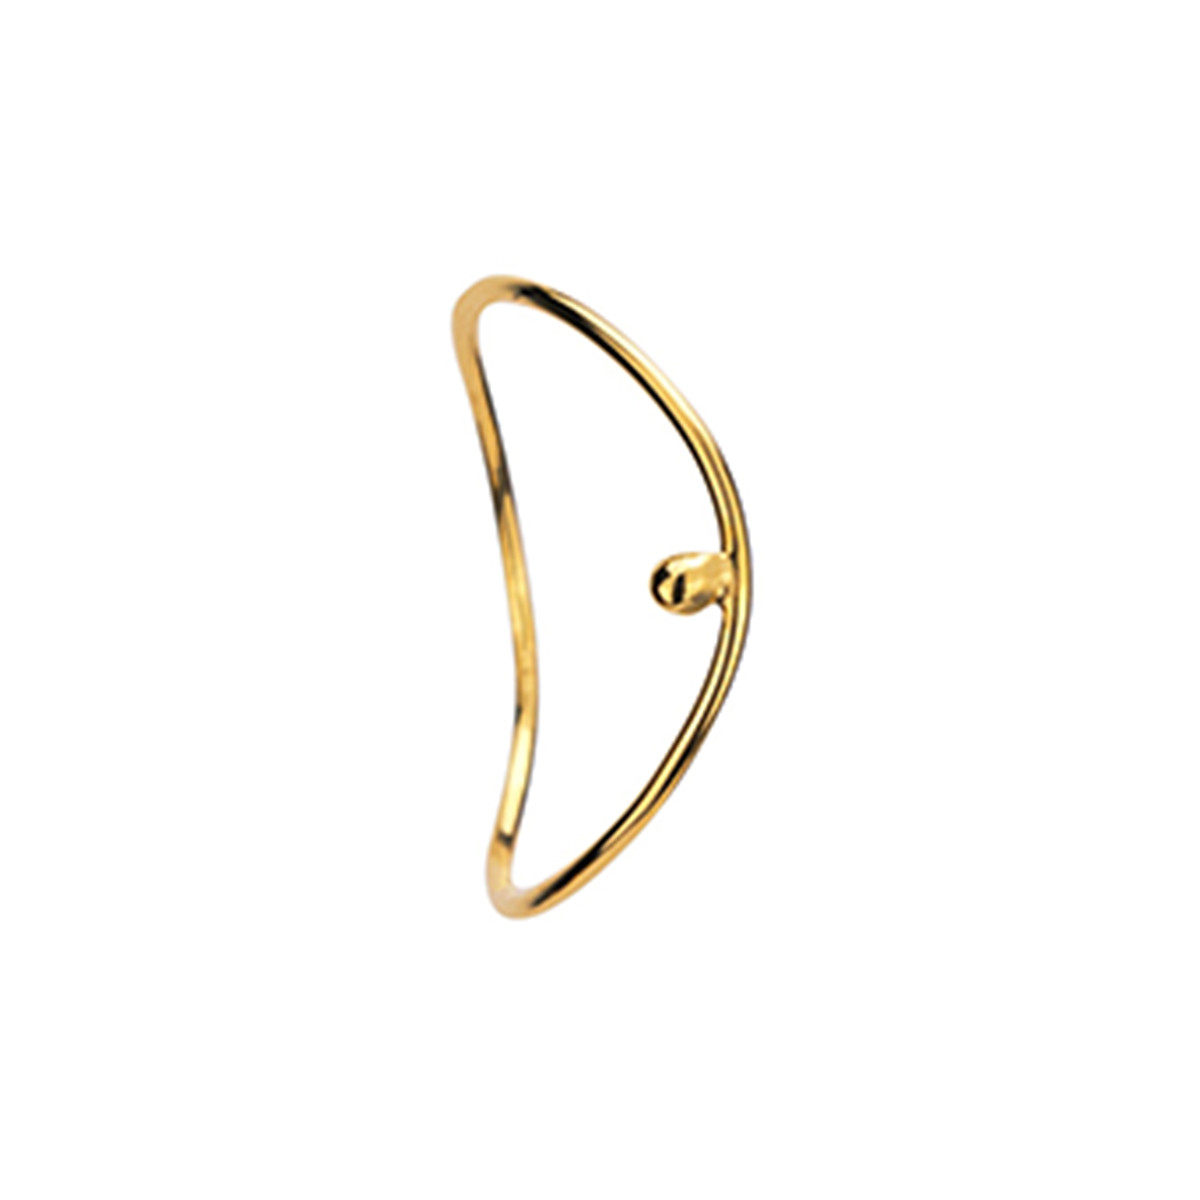 Bonvo: Perle Ring Gold Plated, tomfoolery